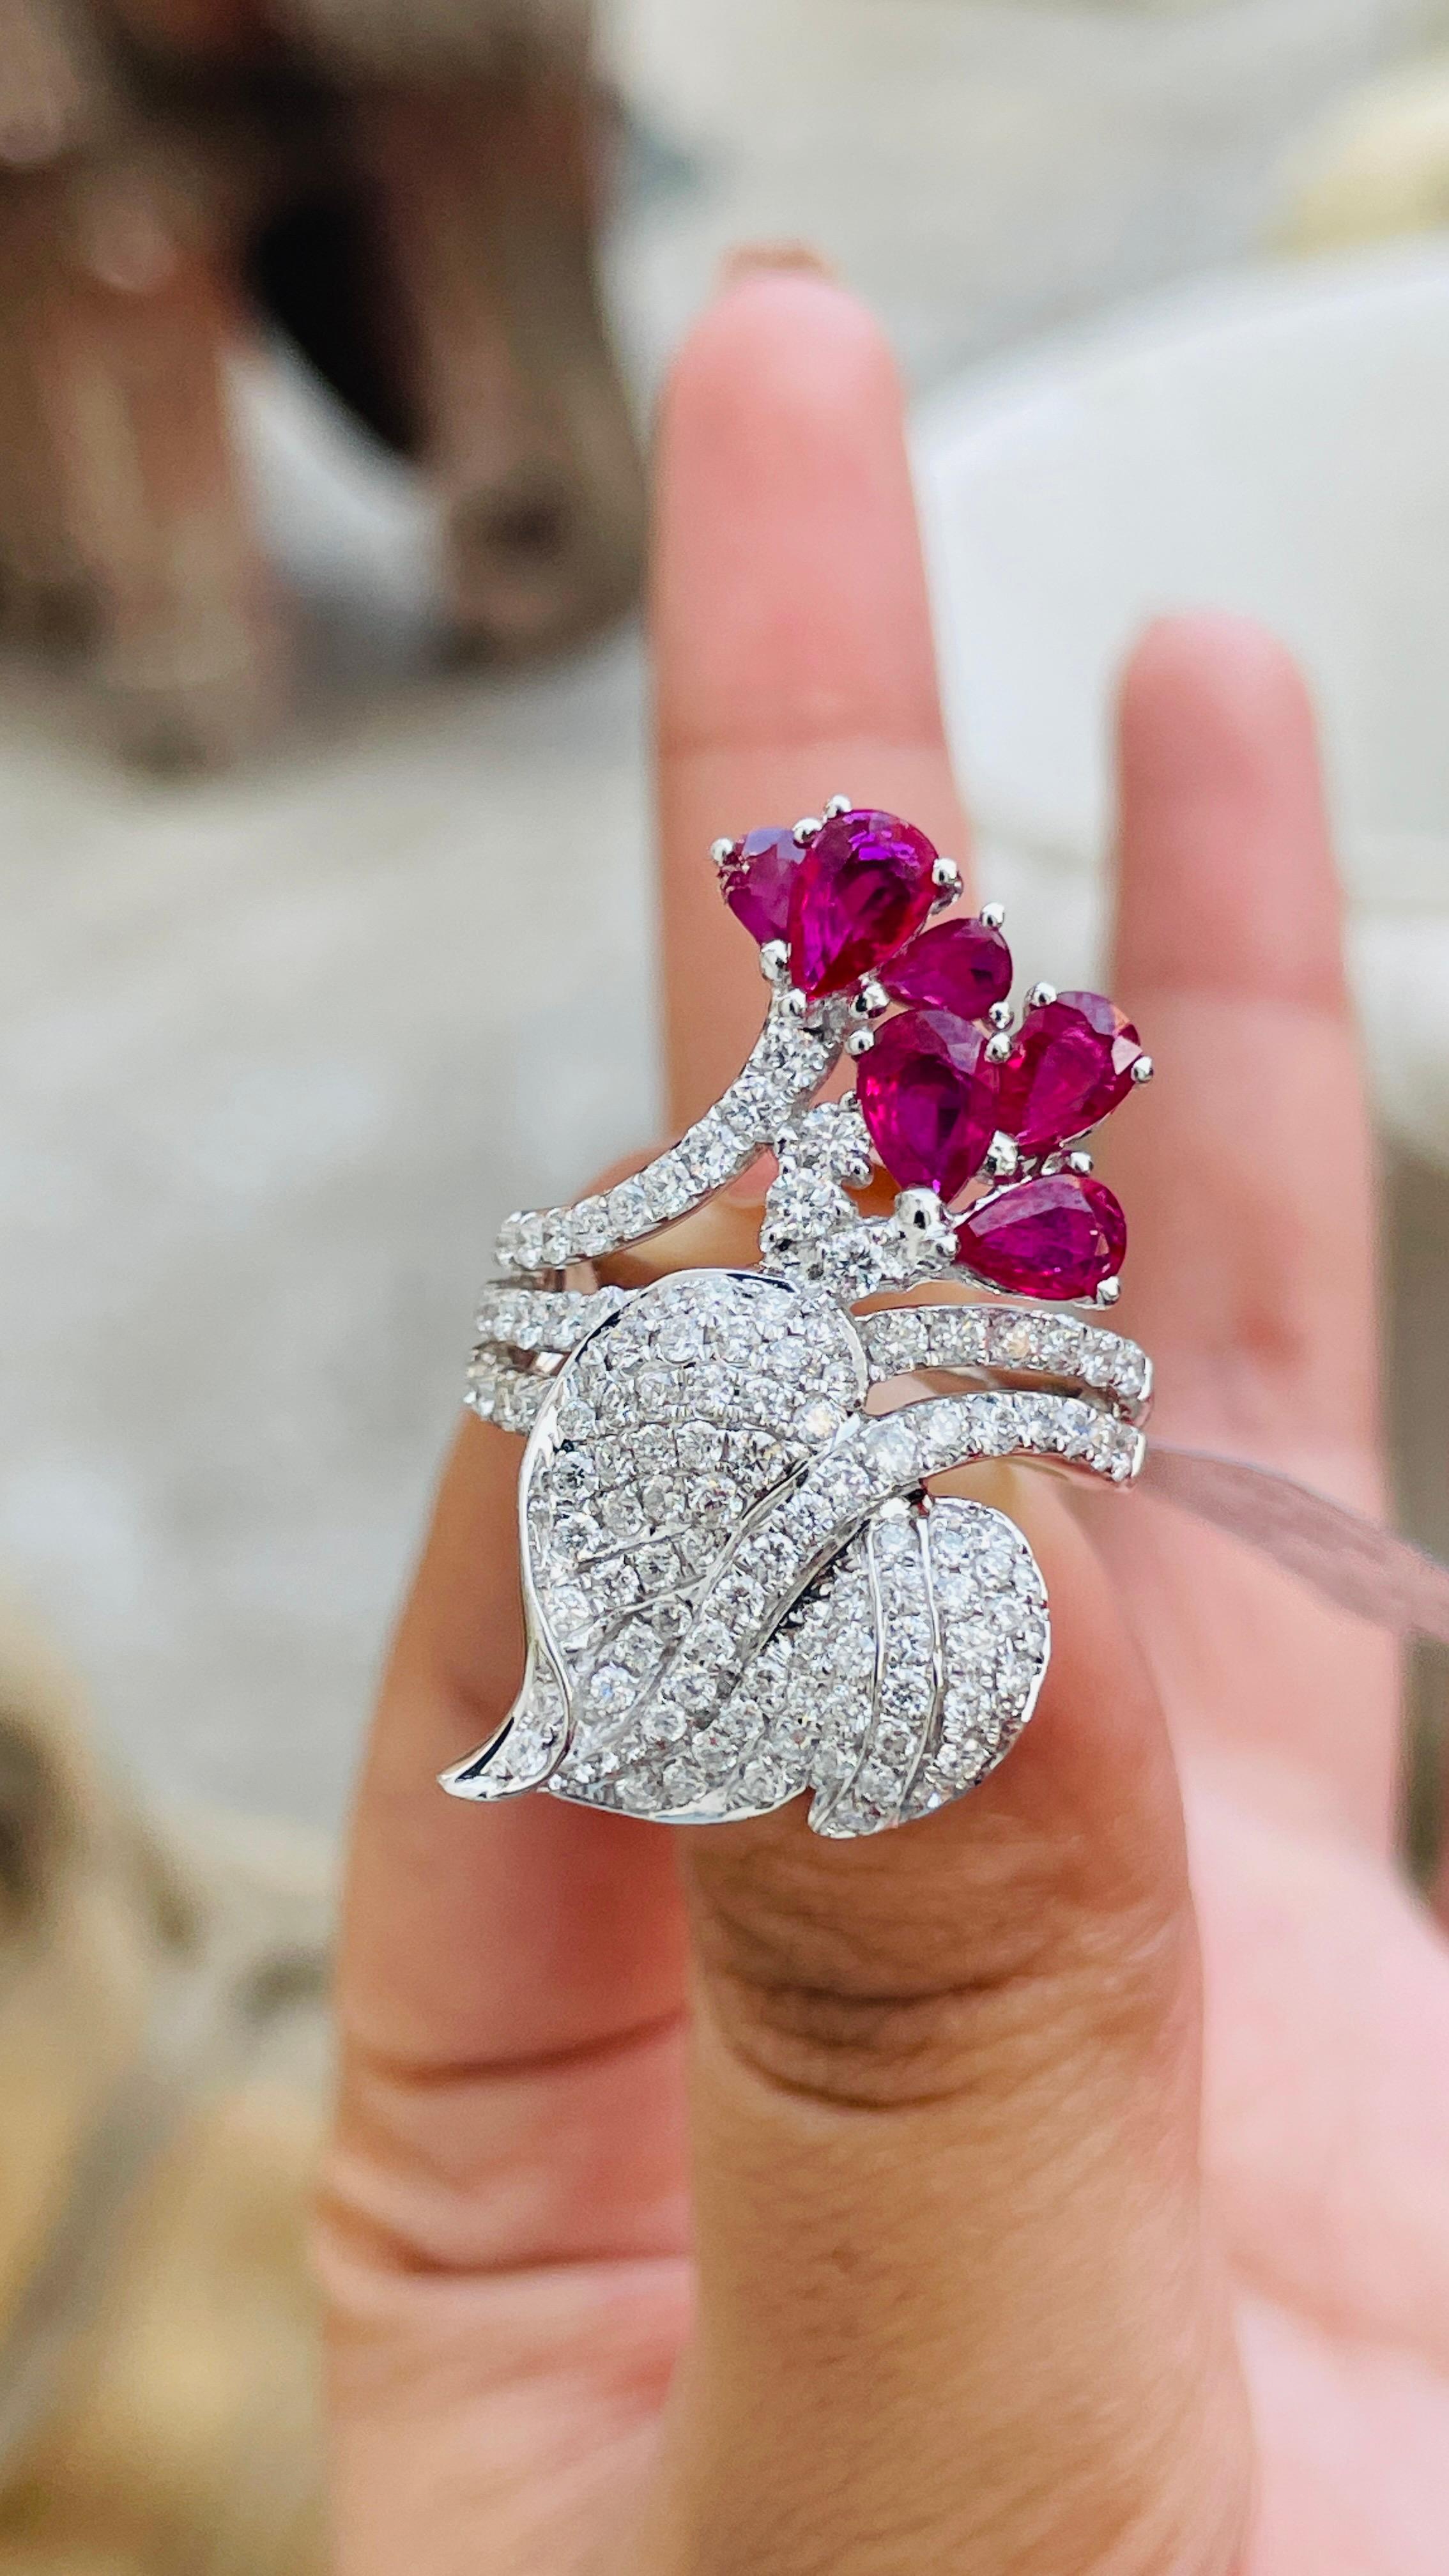 For Sale:  14K White Gold Pear Cut Ruby and Diamond Bridal Ring 8